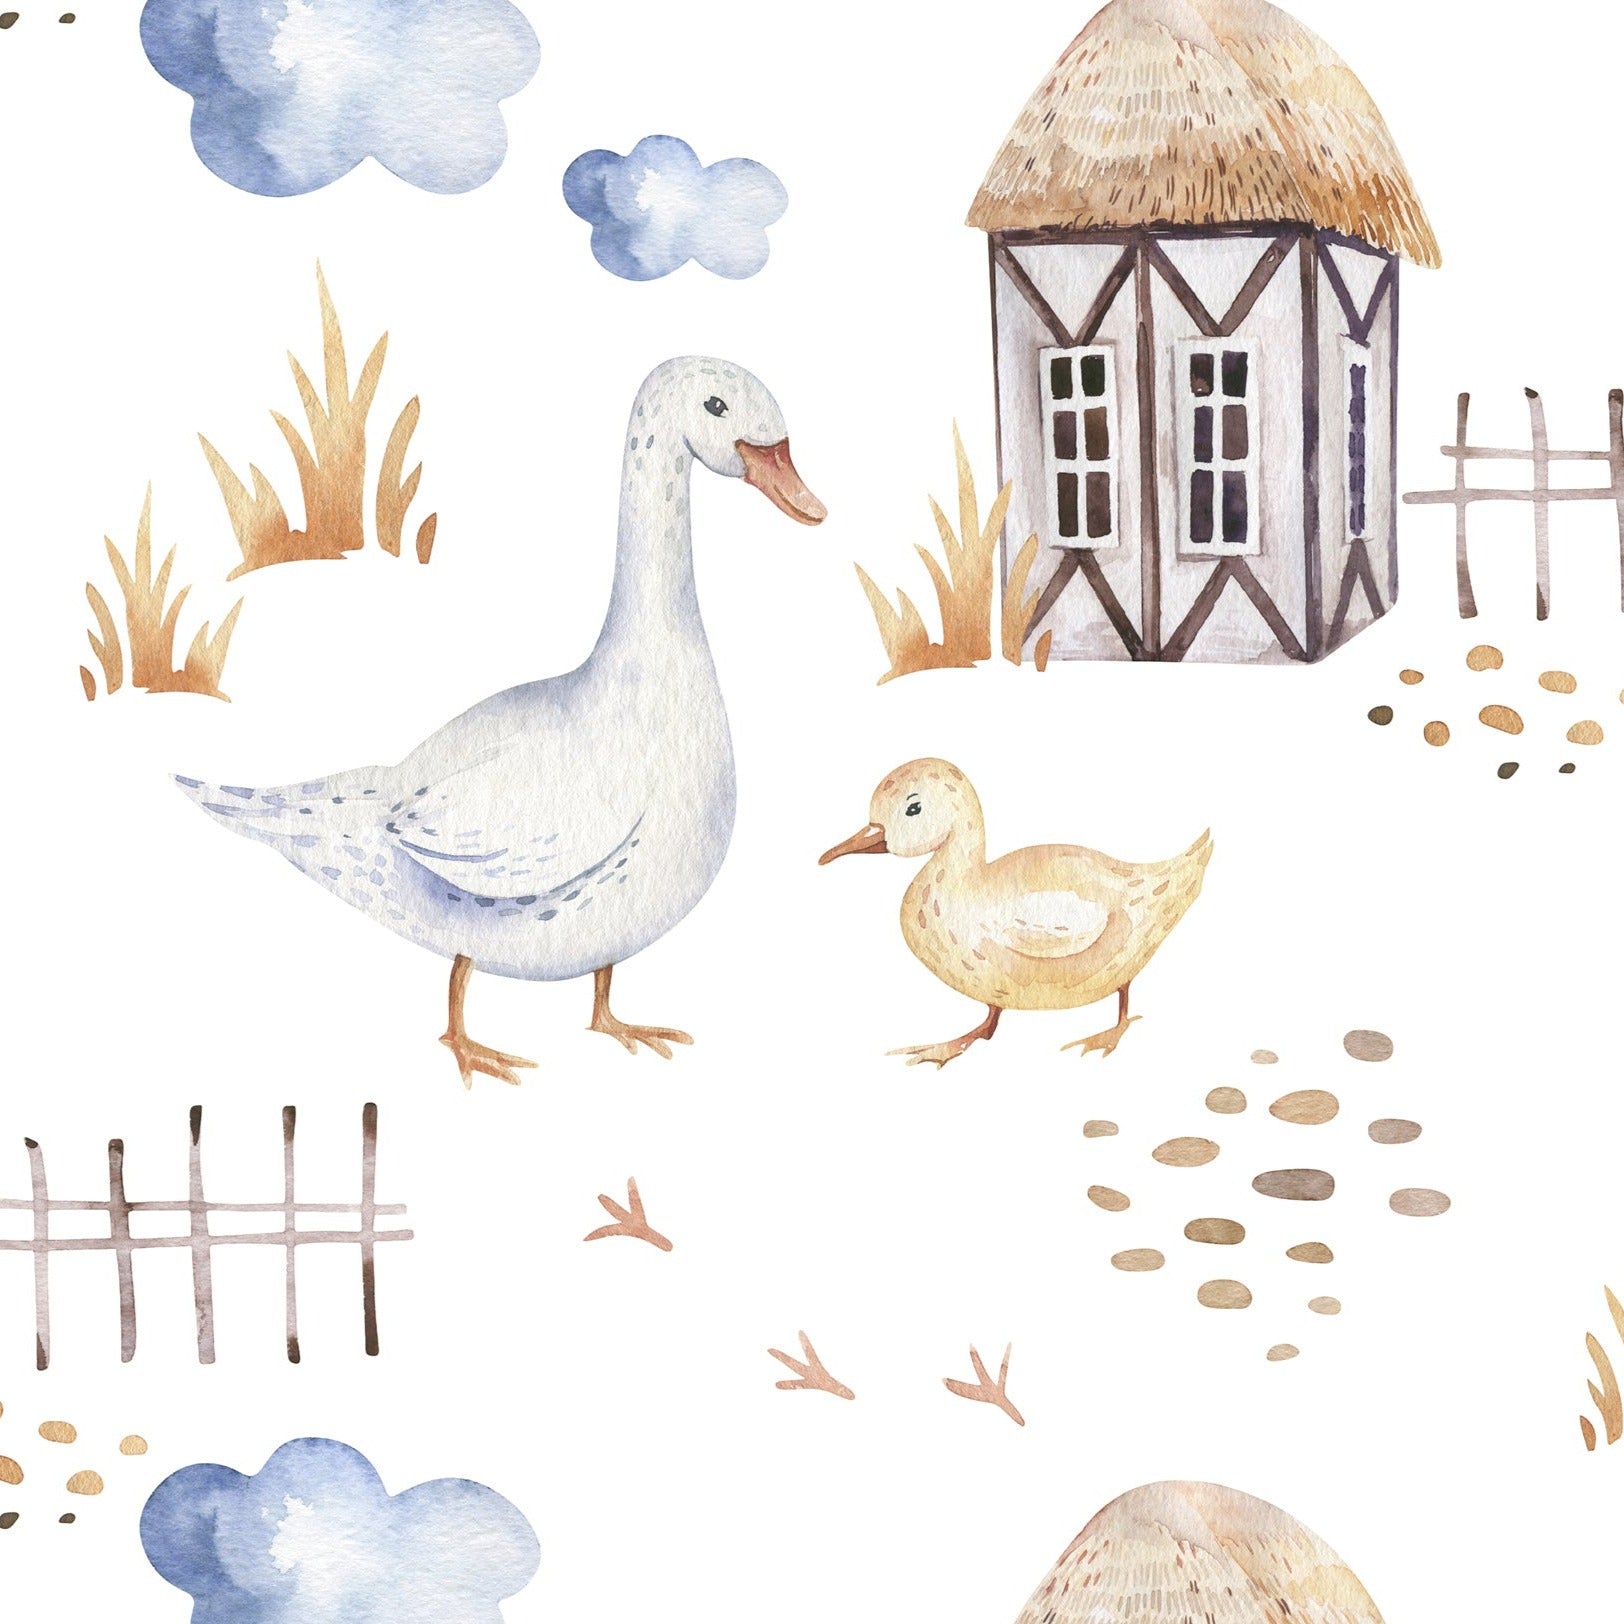 Charming 'Watercolor Farm Animals VI' wallpaper featuring a bucolic scene with watercolor geese, chicks, and rustic farmhouses amidst tufts of grass and floating clouds, set on a white background, perfect for a child's nursery